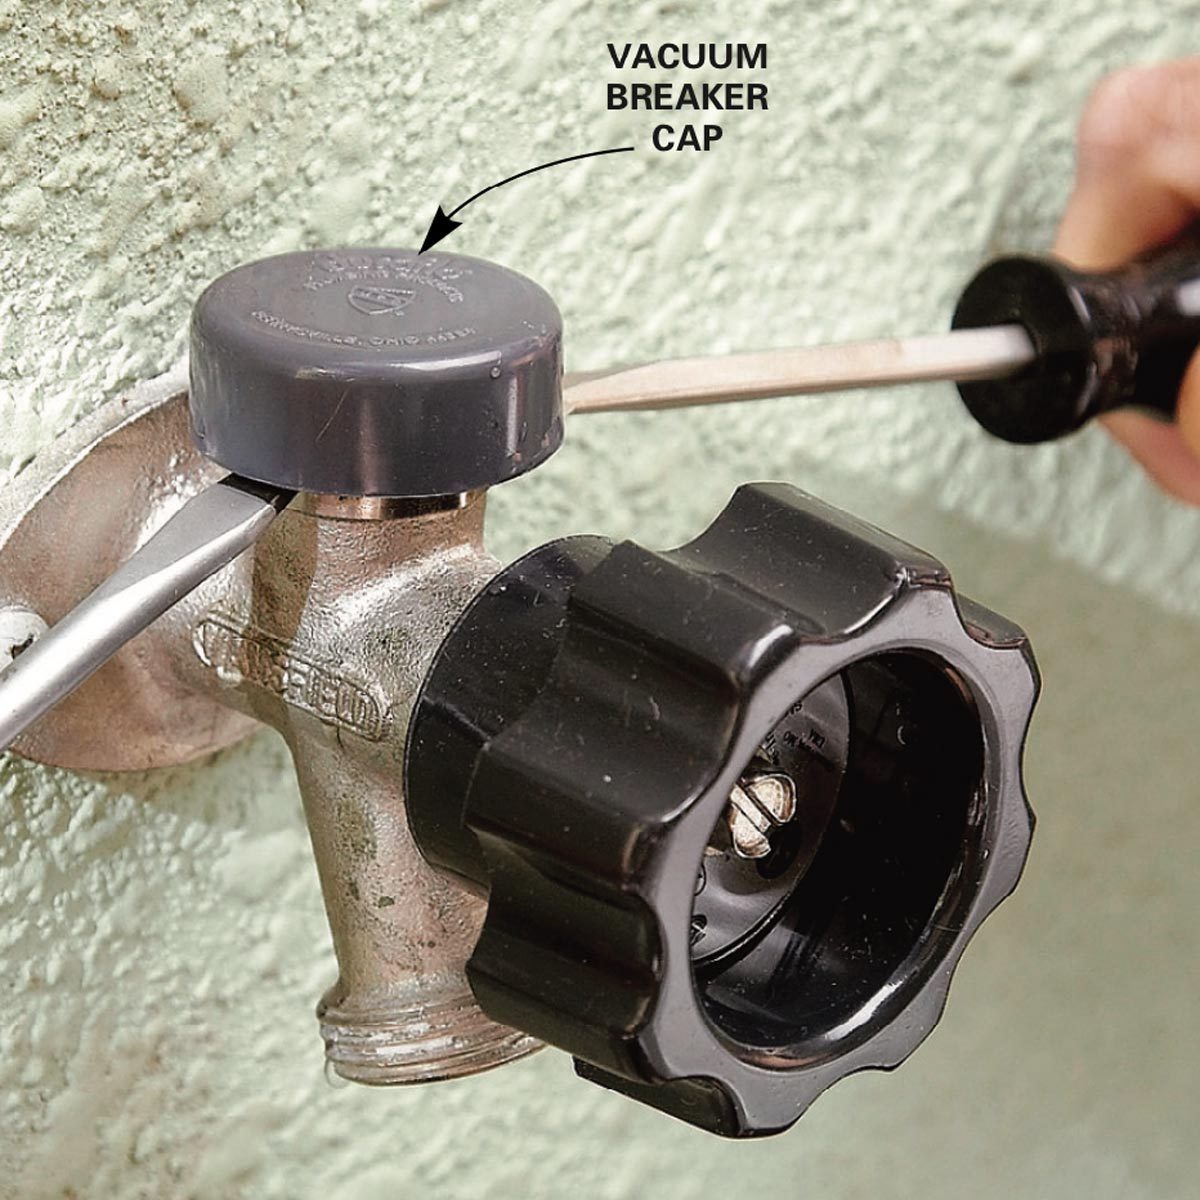 Fix A Leaking Frost Proof Faucet Family Handyman